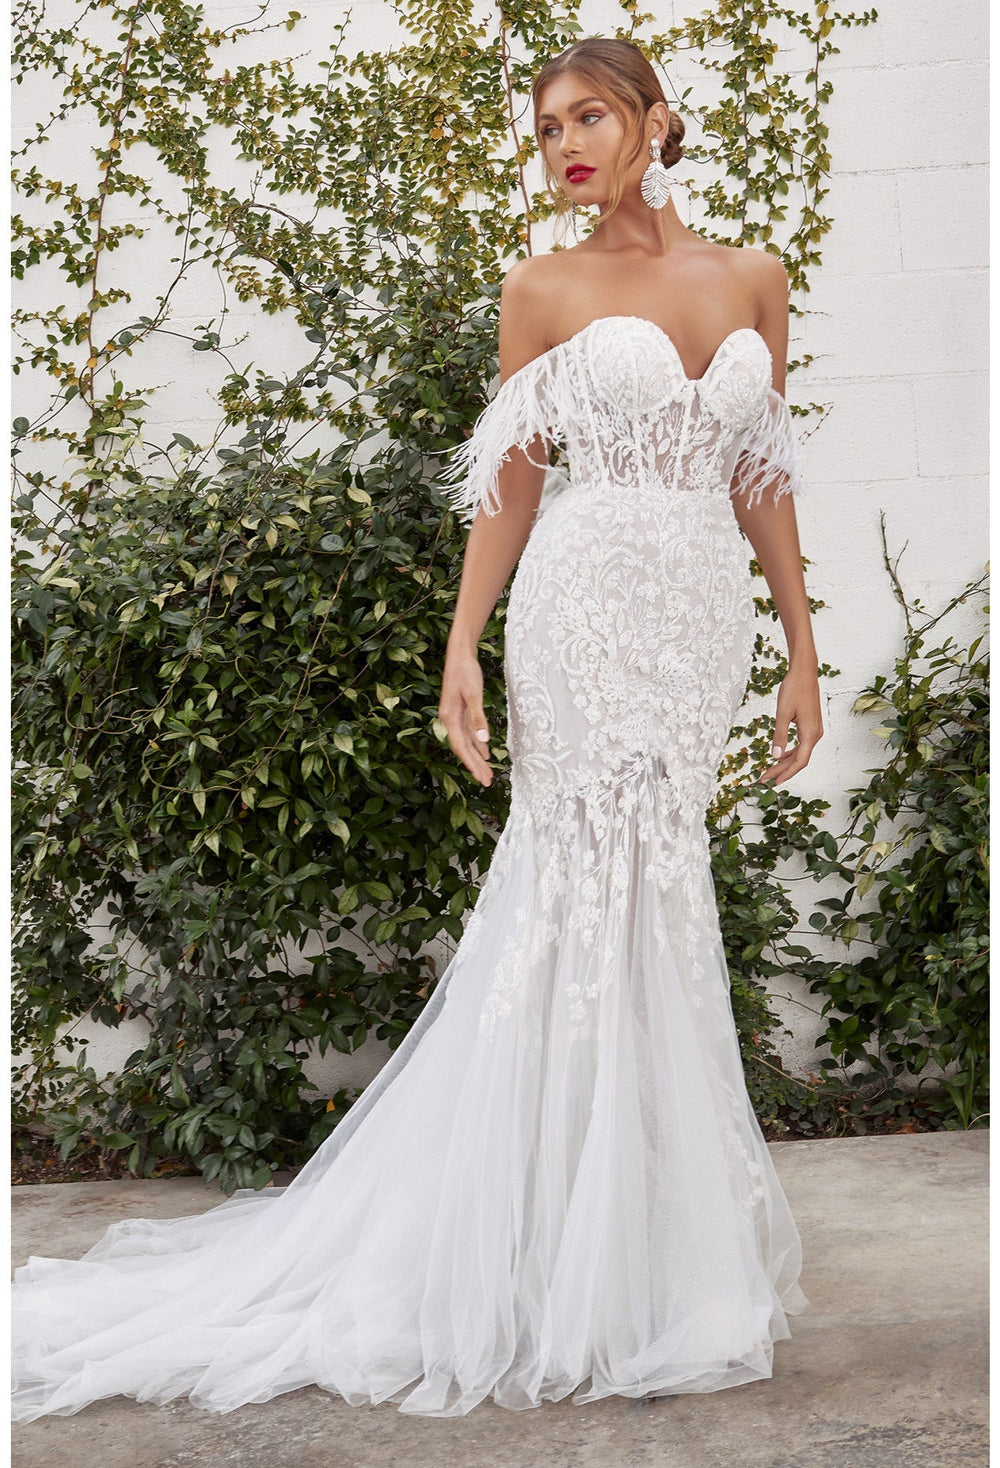 NoraCoutureNY Bridal Gown Katie Bridal Gown NorasBridalBoutiqueNY